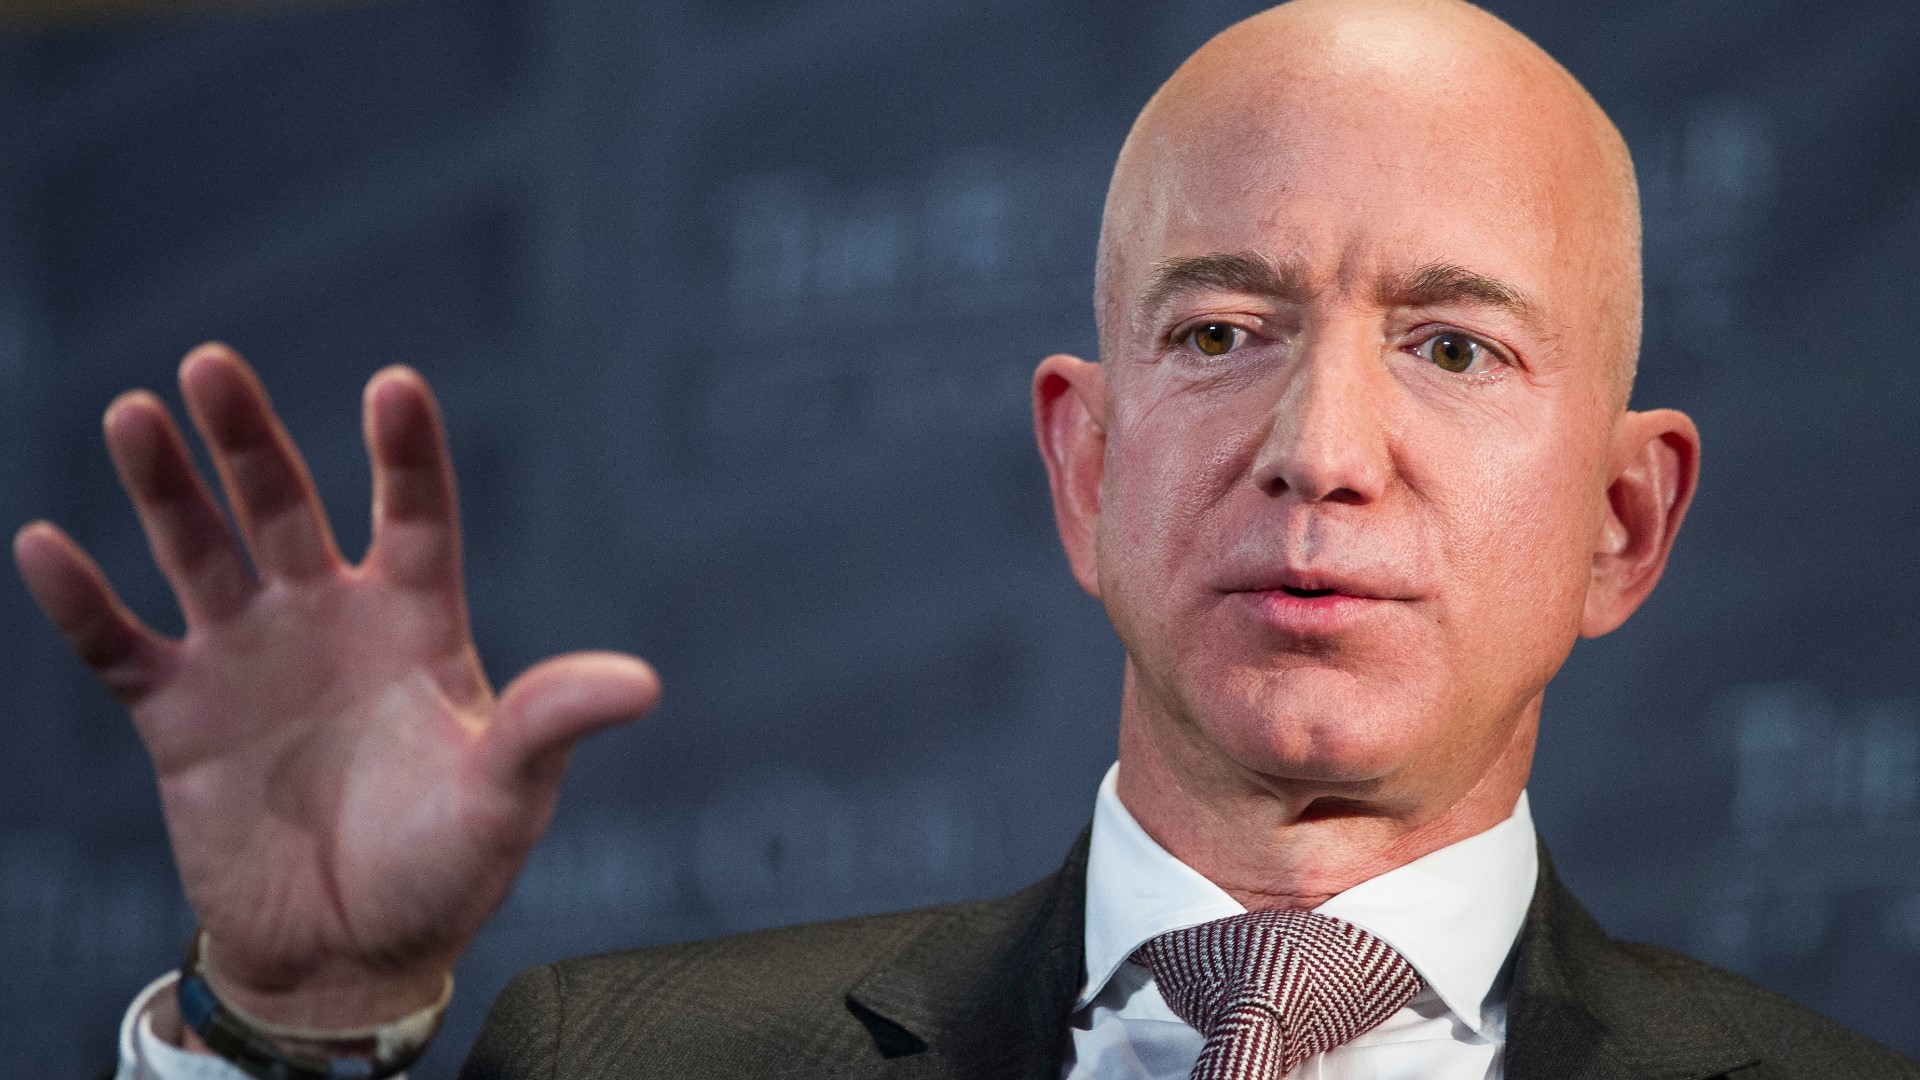 Bezos will hand over the role to Andy Jassy Monday, but will still hold a large amount of power at the company.